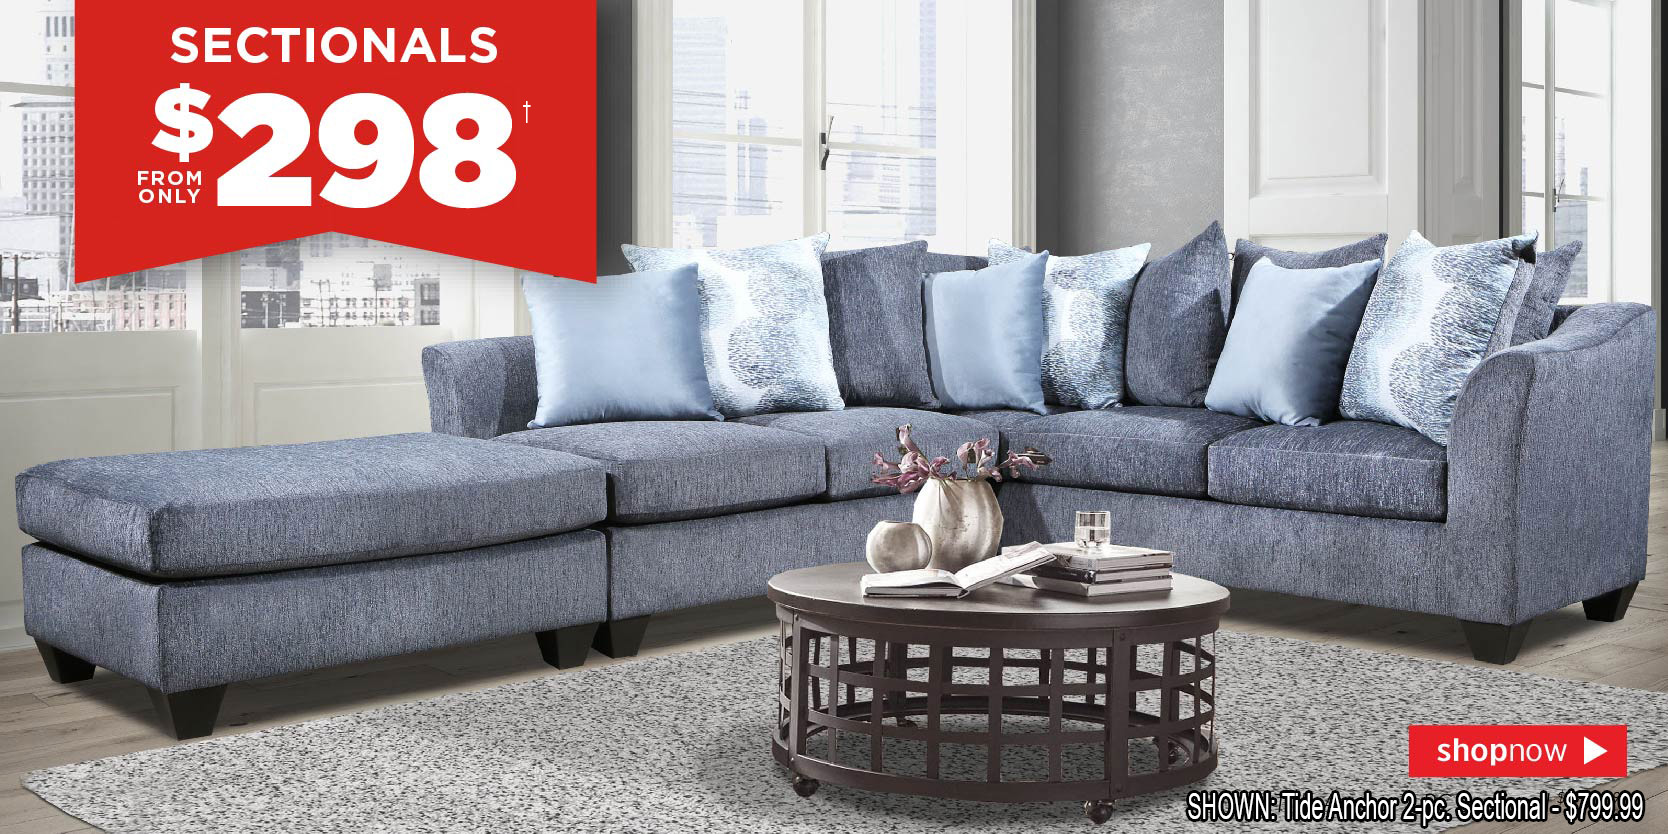 Save on Sectionals!